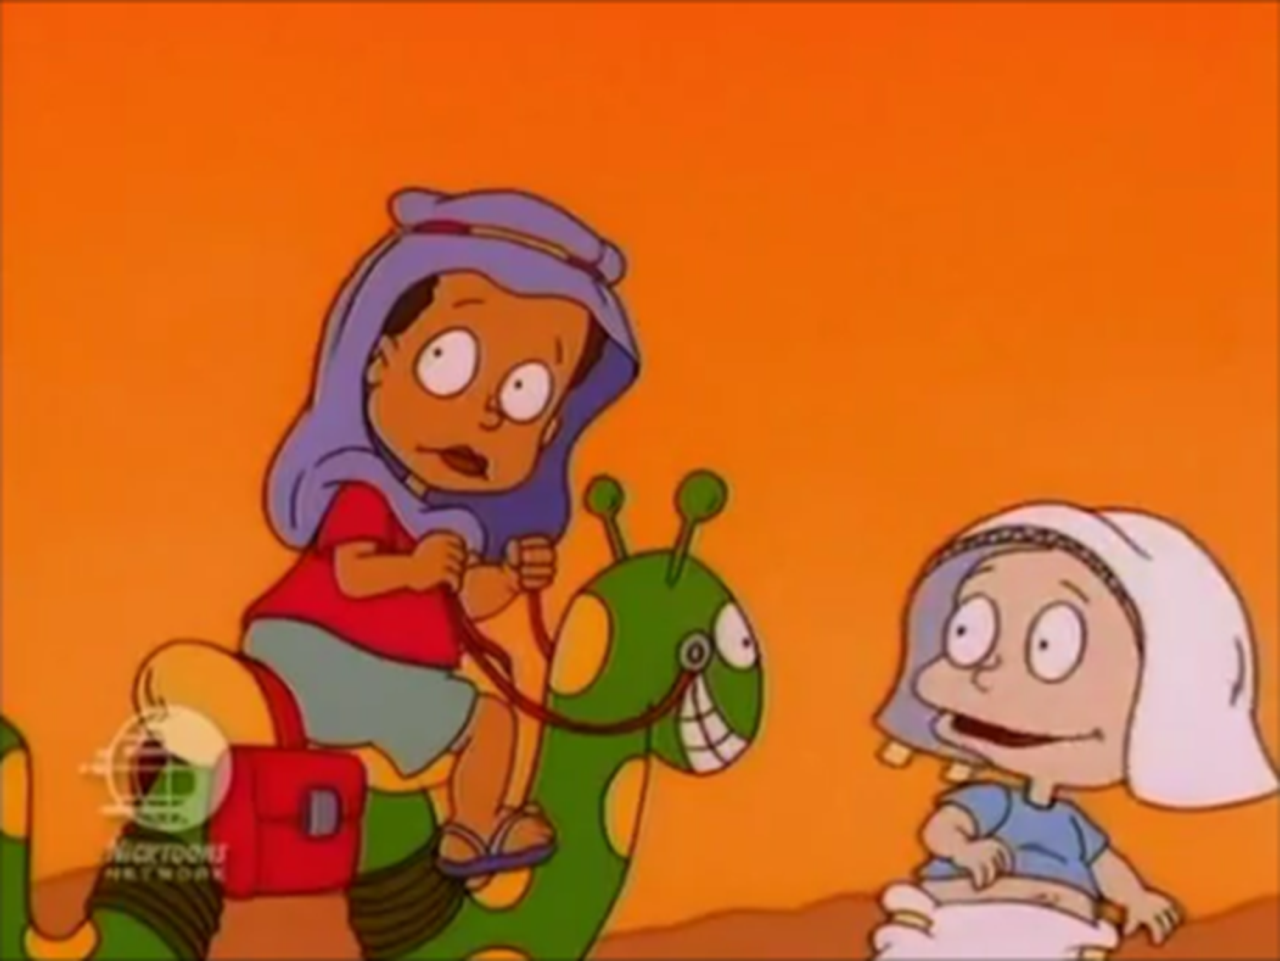 captainkirk94: Yall remember that episode if Rugrats, where they almost died of heat